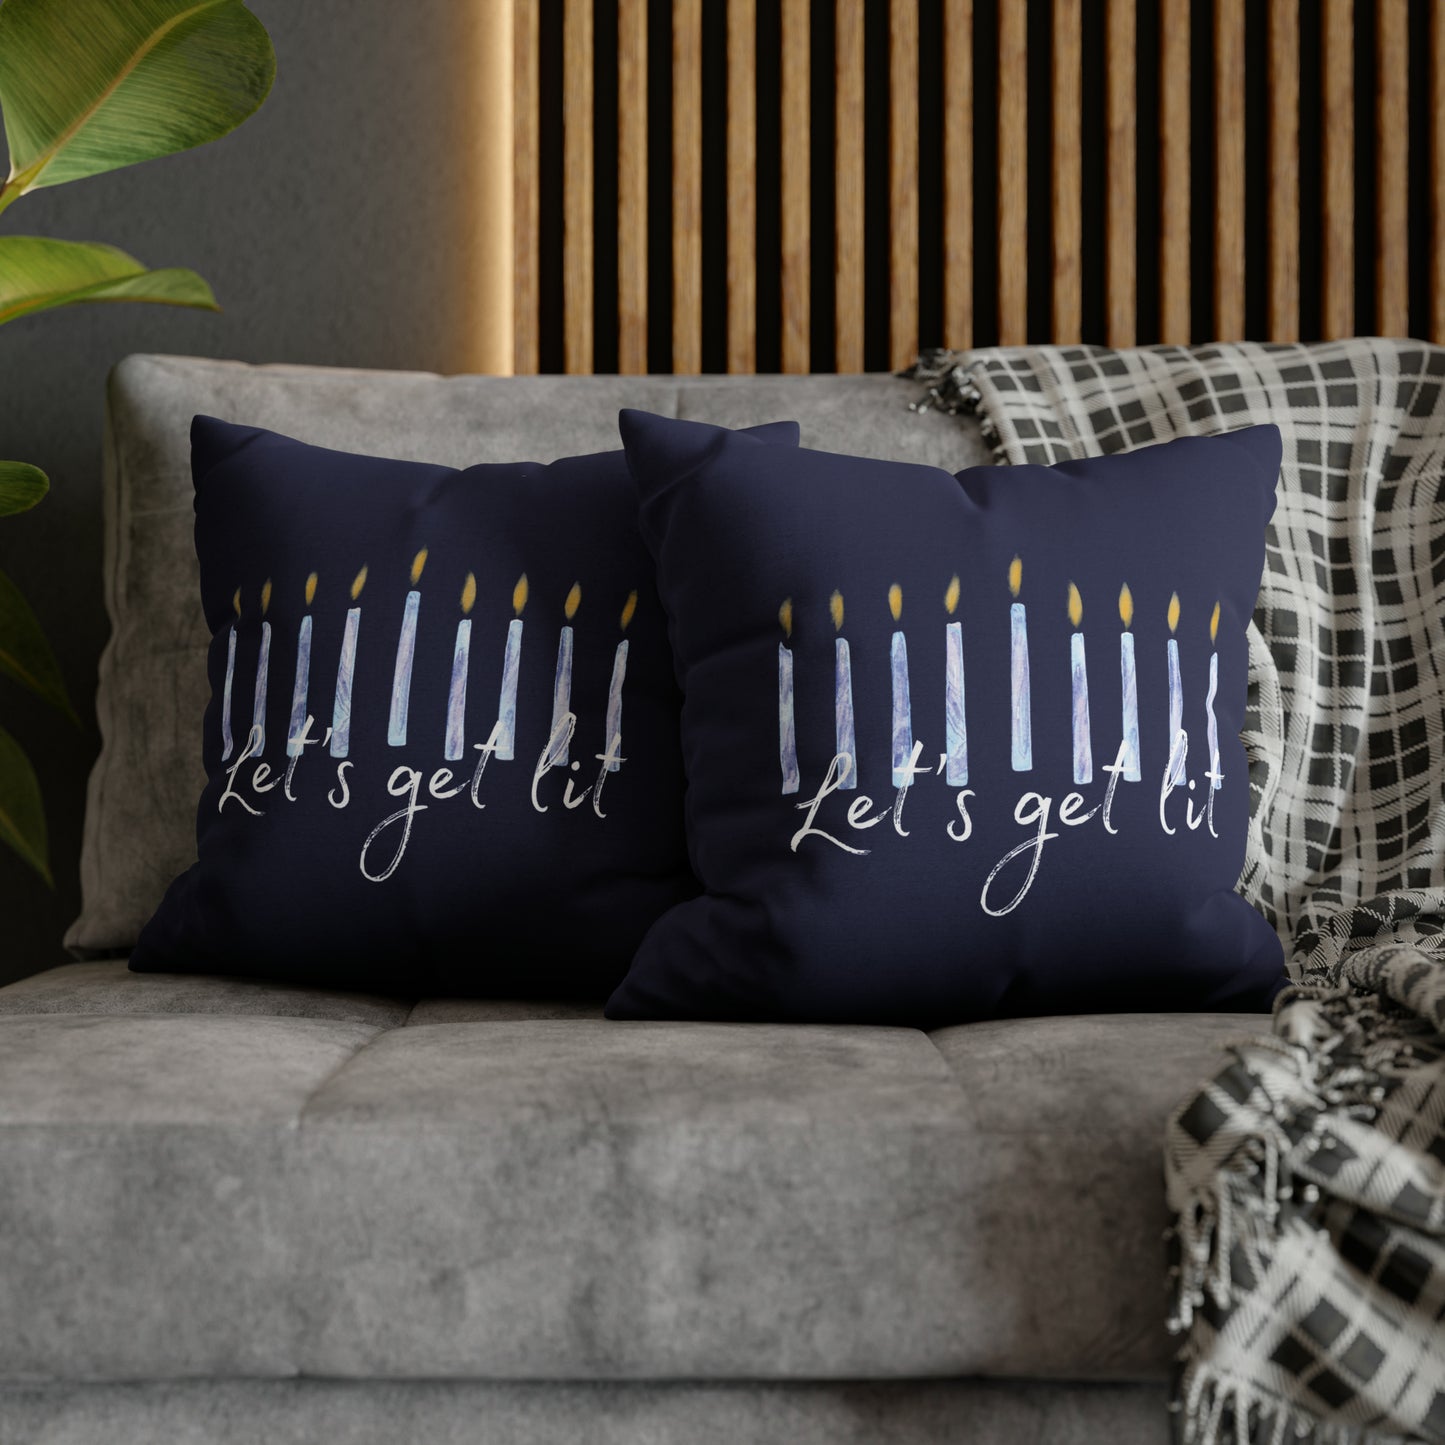 let's get lit hanukkah couch throw pillow covers